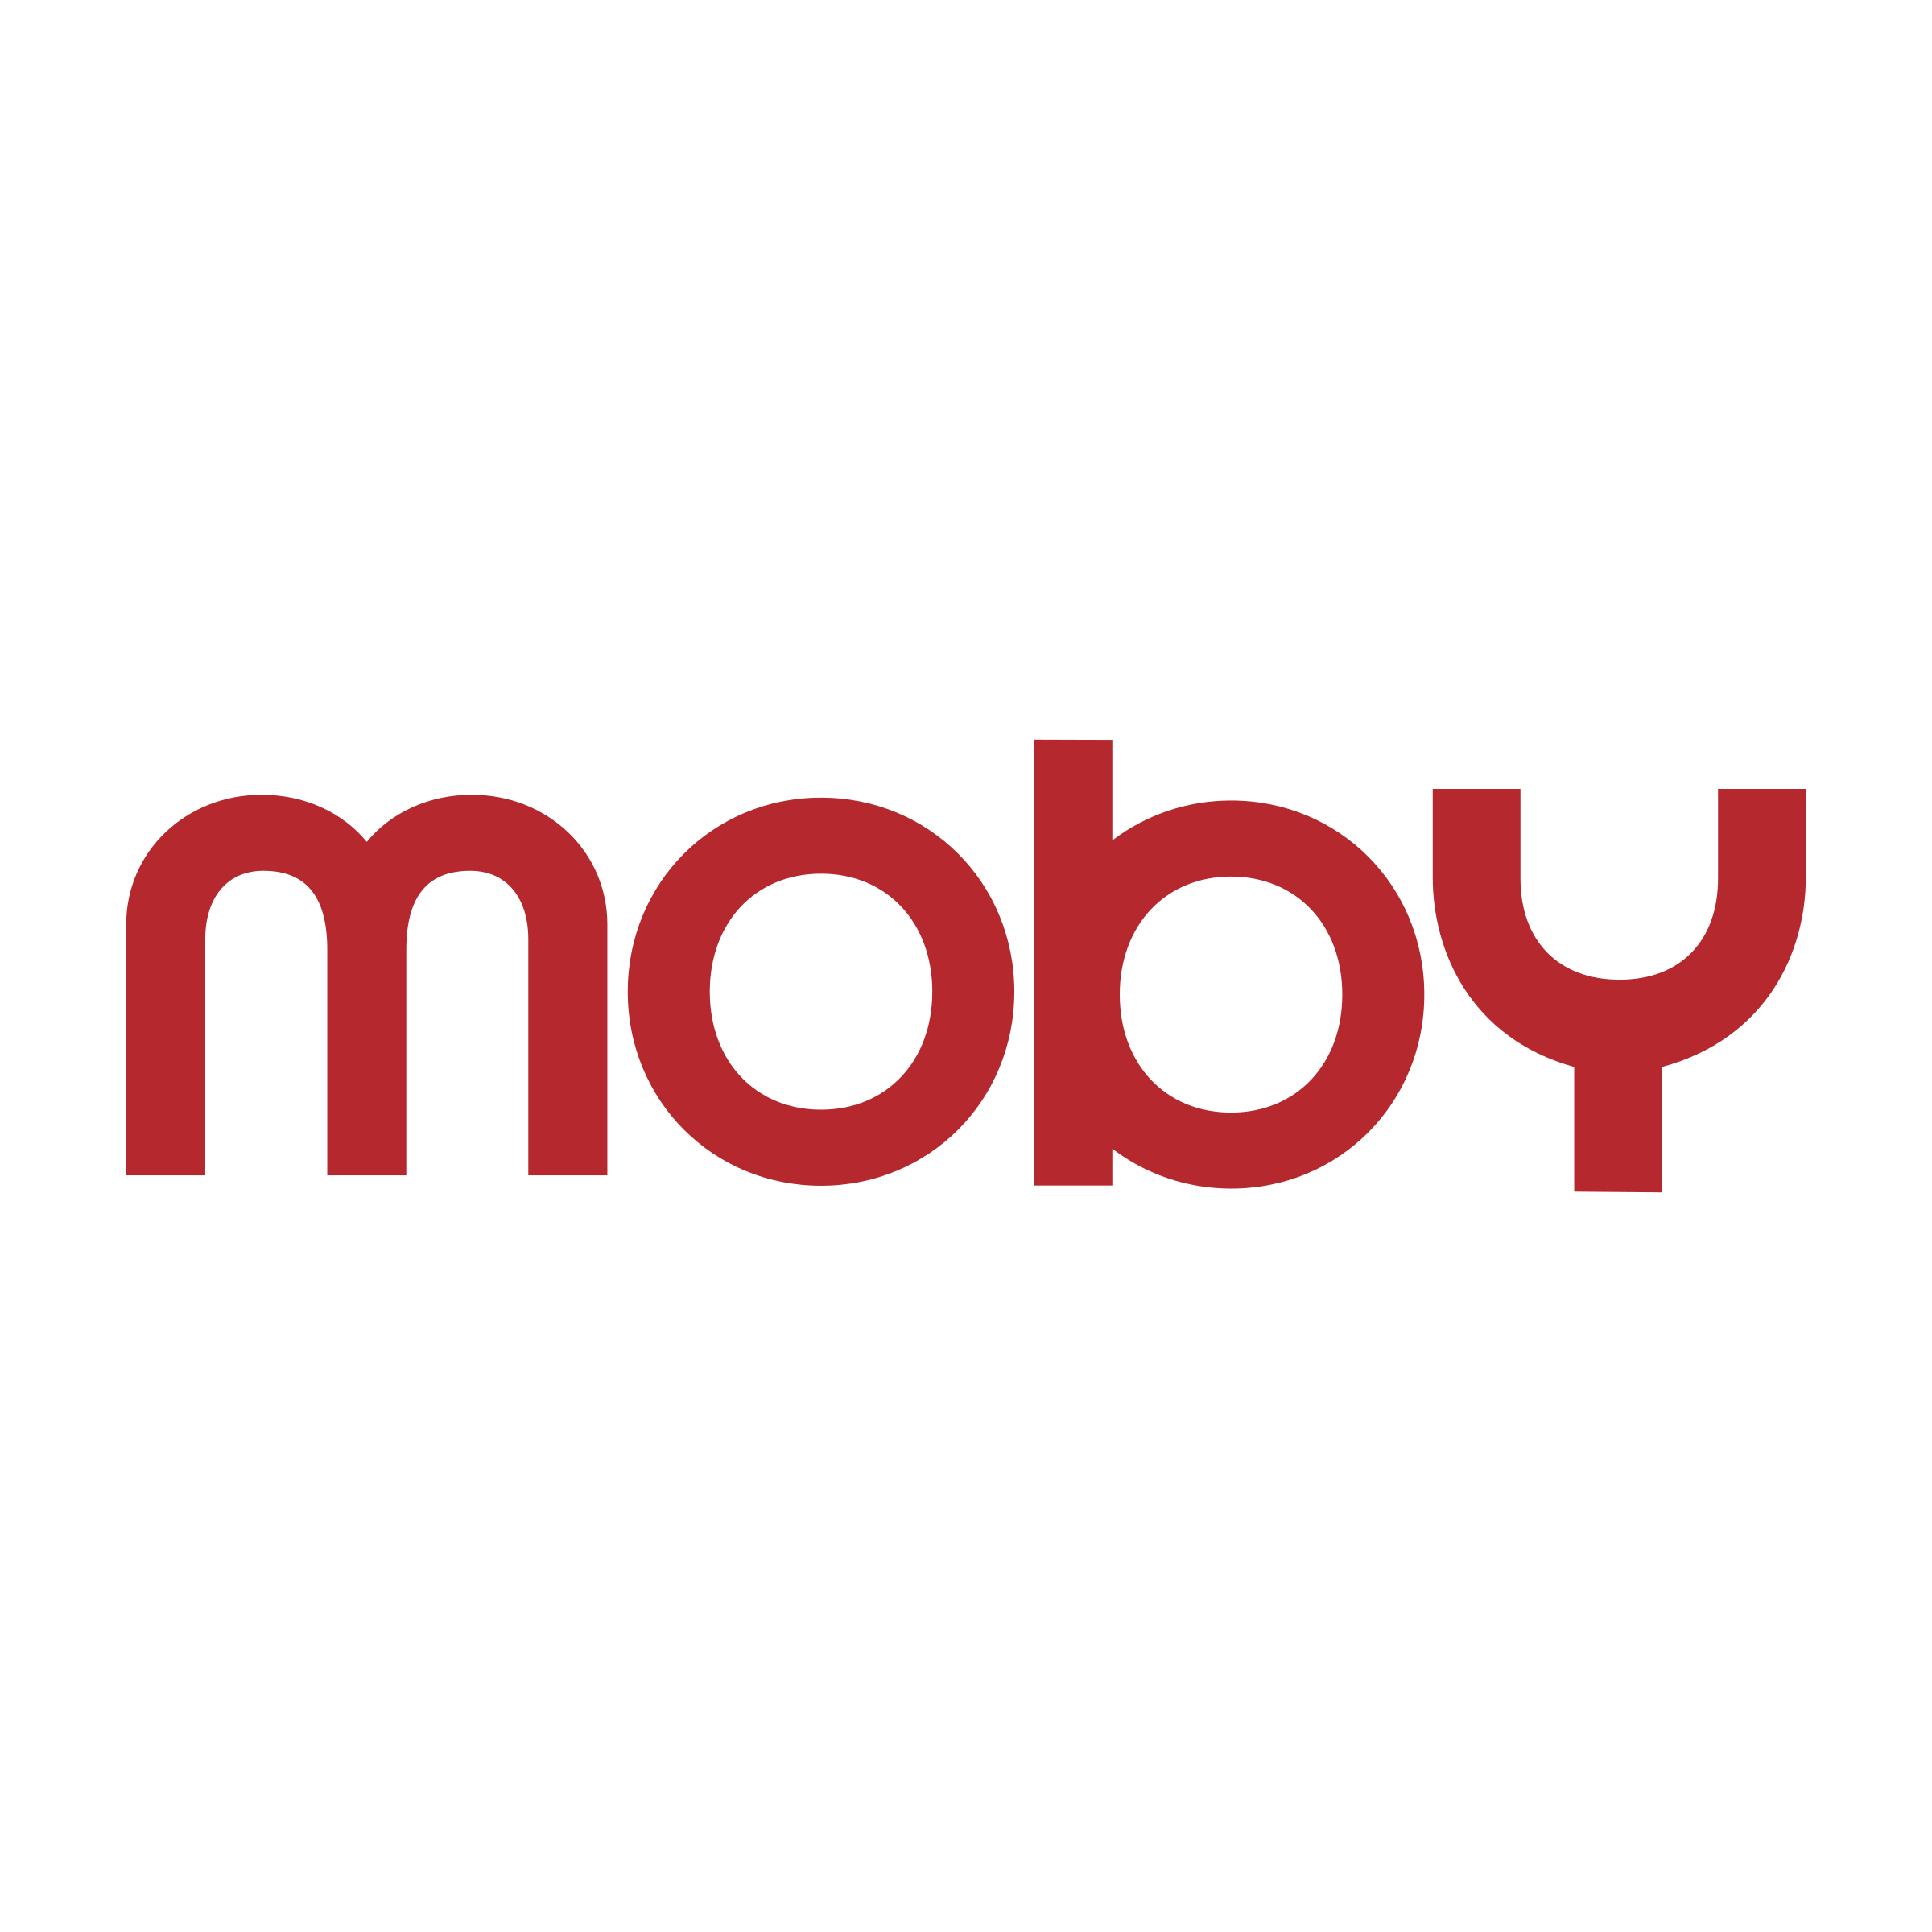 Moby Logo - Moj Moby Logo PNG Transparent & SVG Vector - Freebie Supply